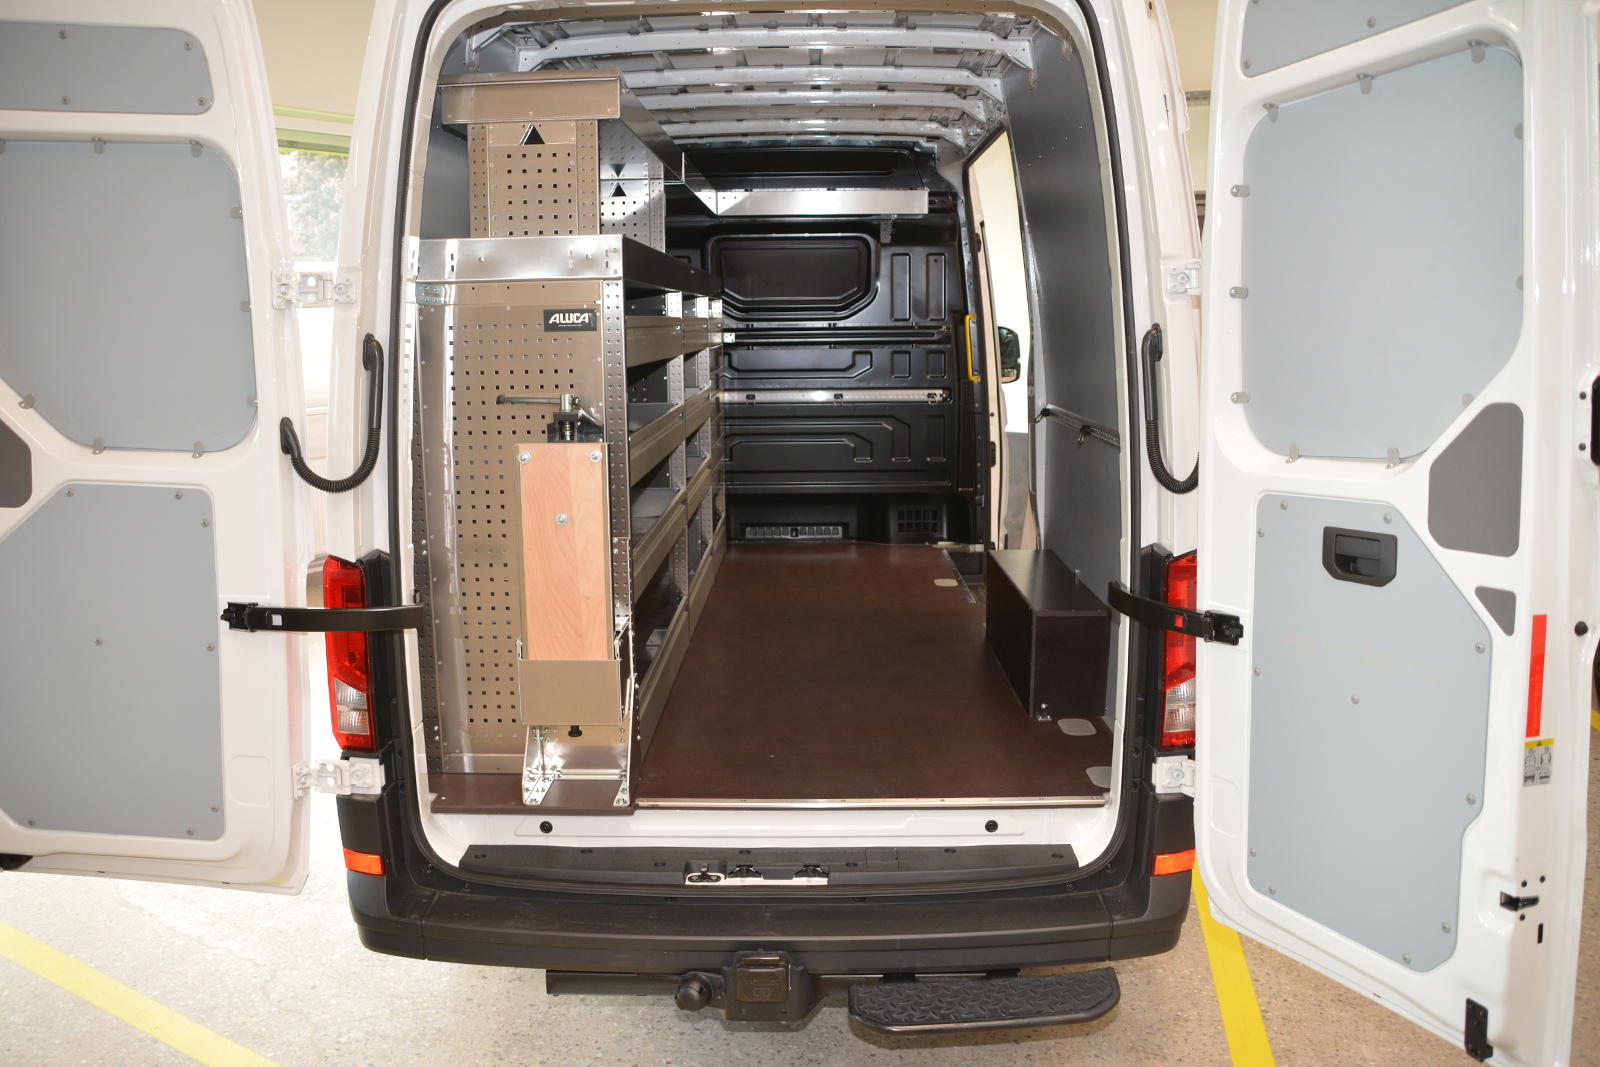 haselberger_vw_crafter_04